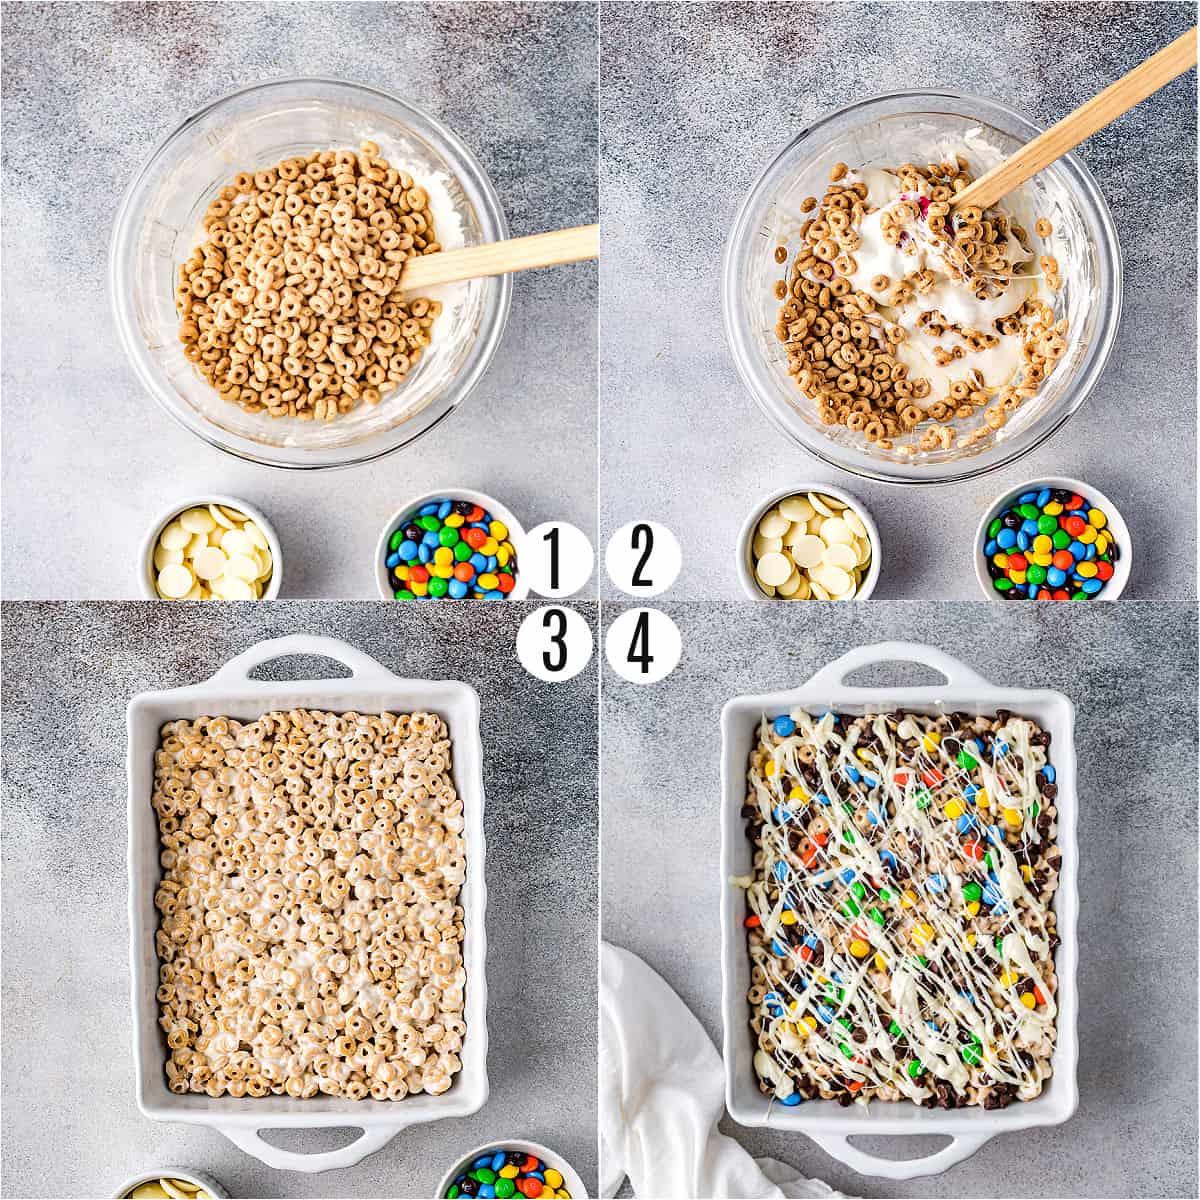 Step by step photos showing how to make cheerio cereal bars.